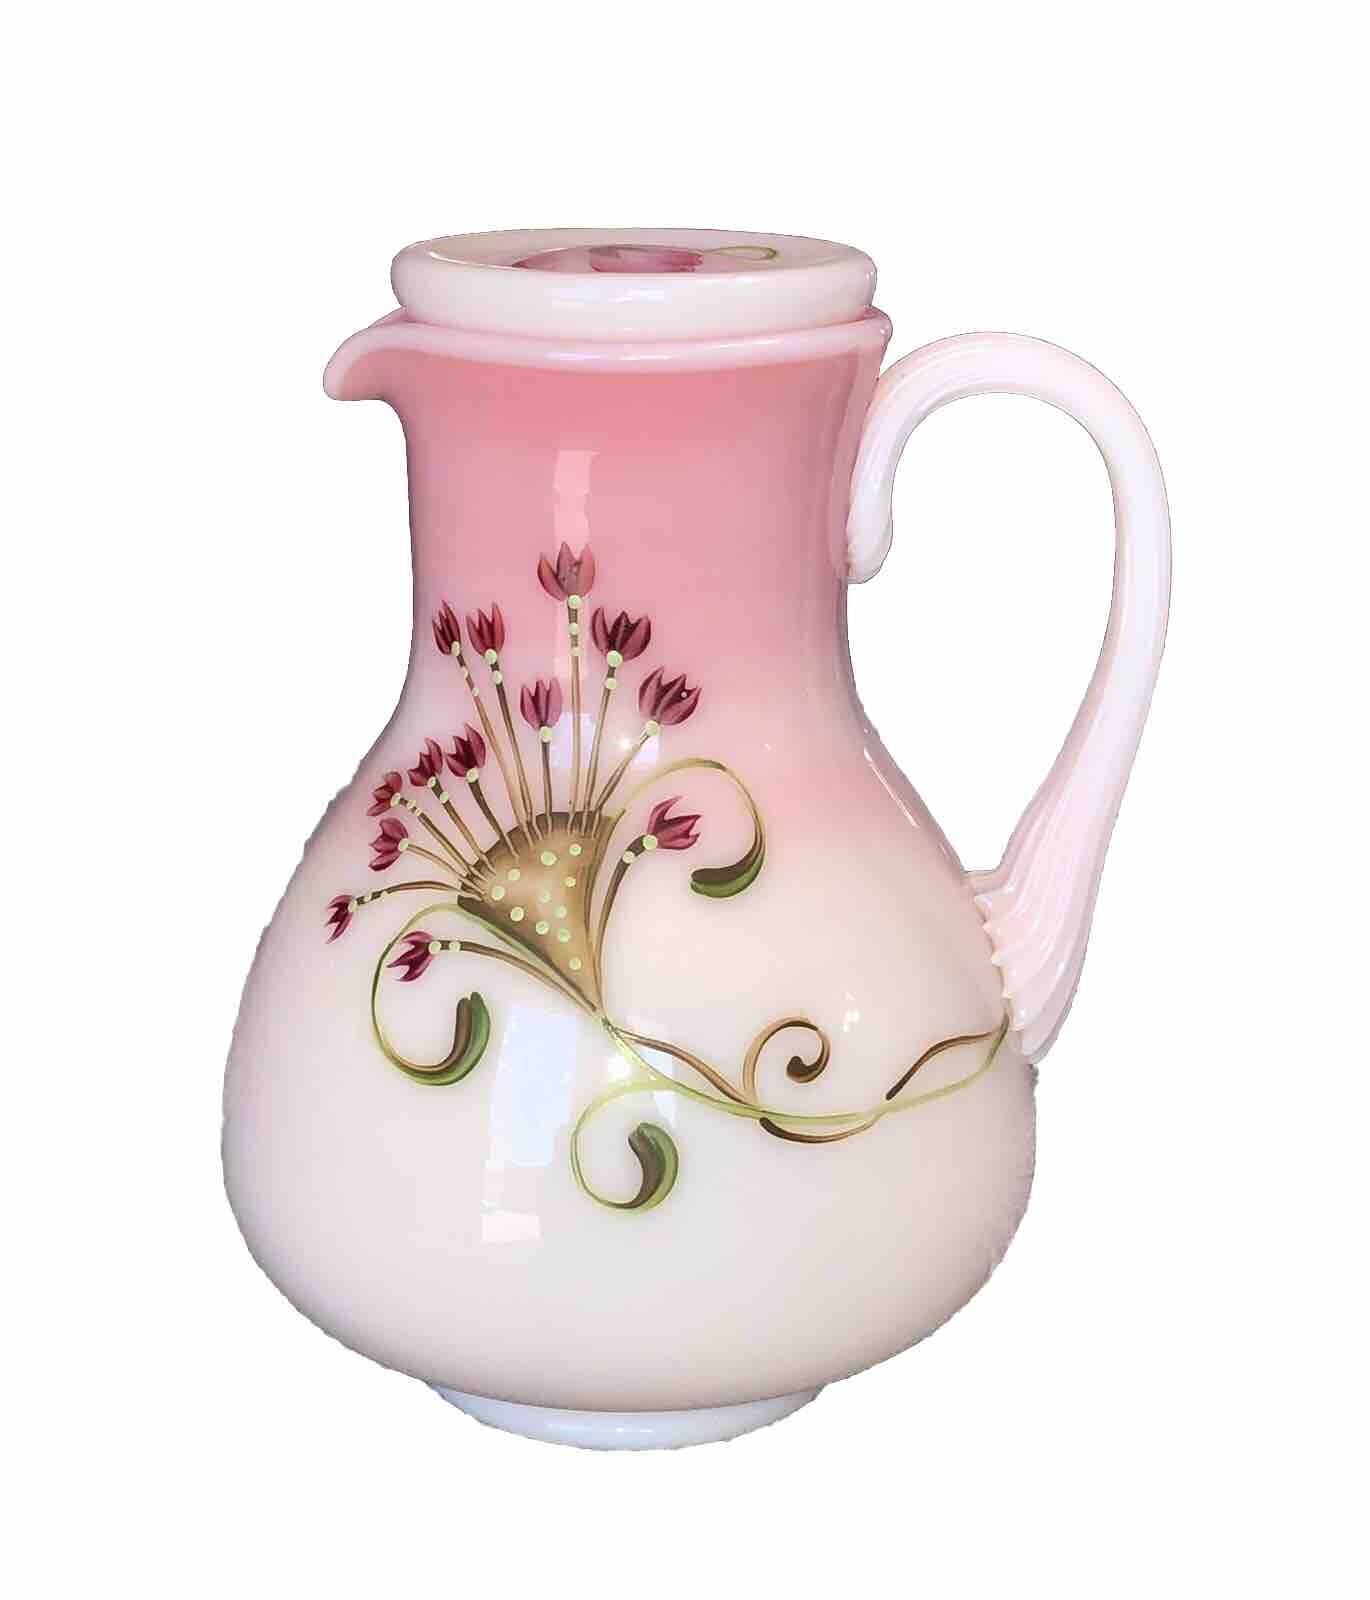 Fenton Glass - Rosalene Serenity Tumble Up Guest Set - Hand Painted